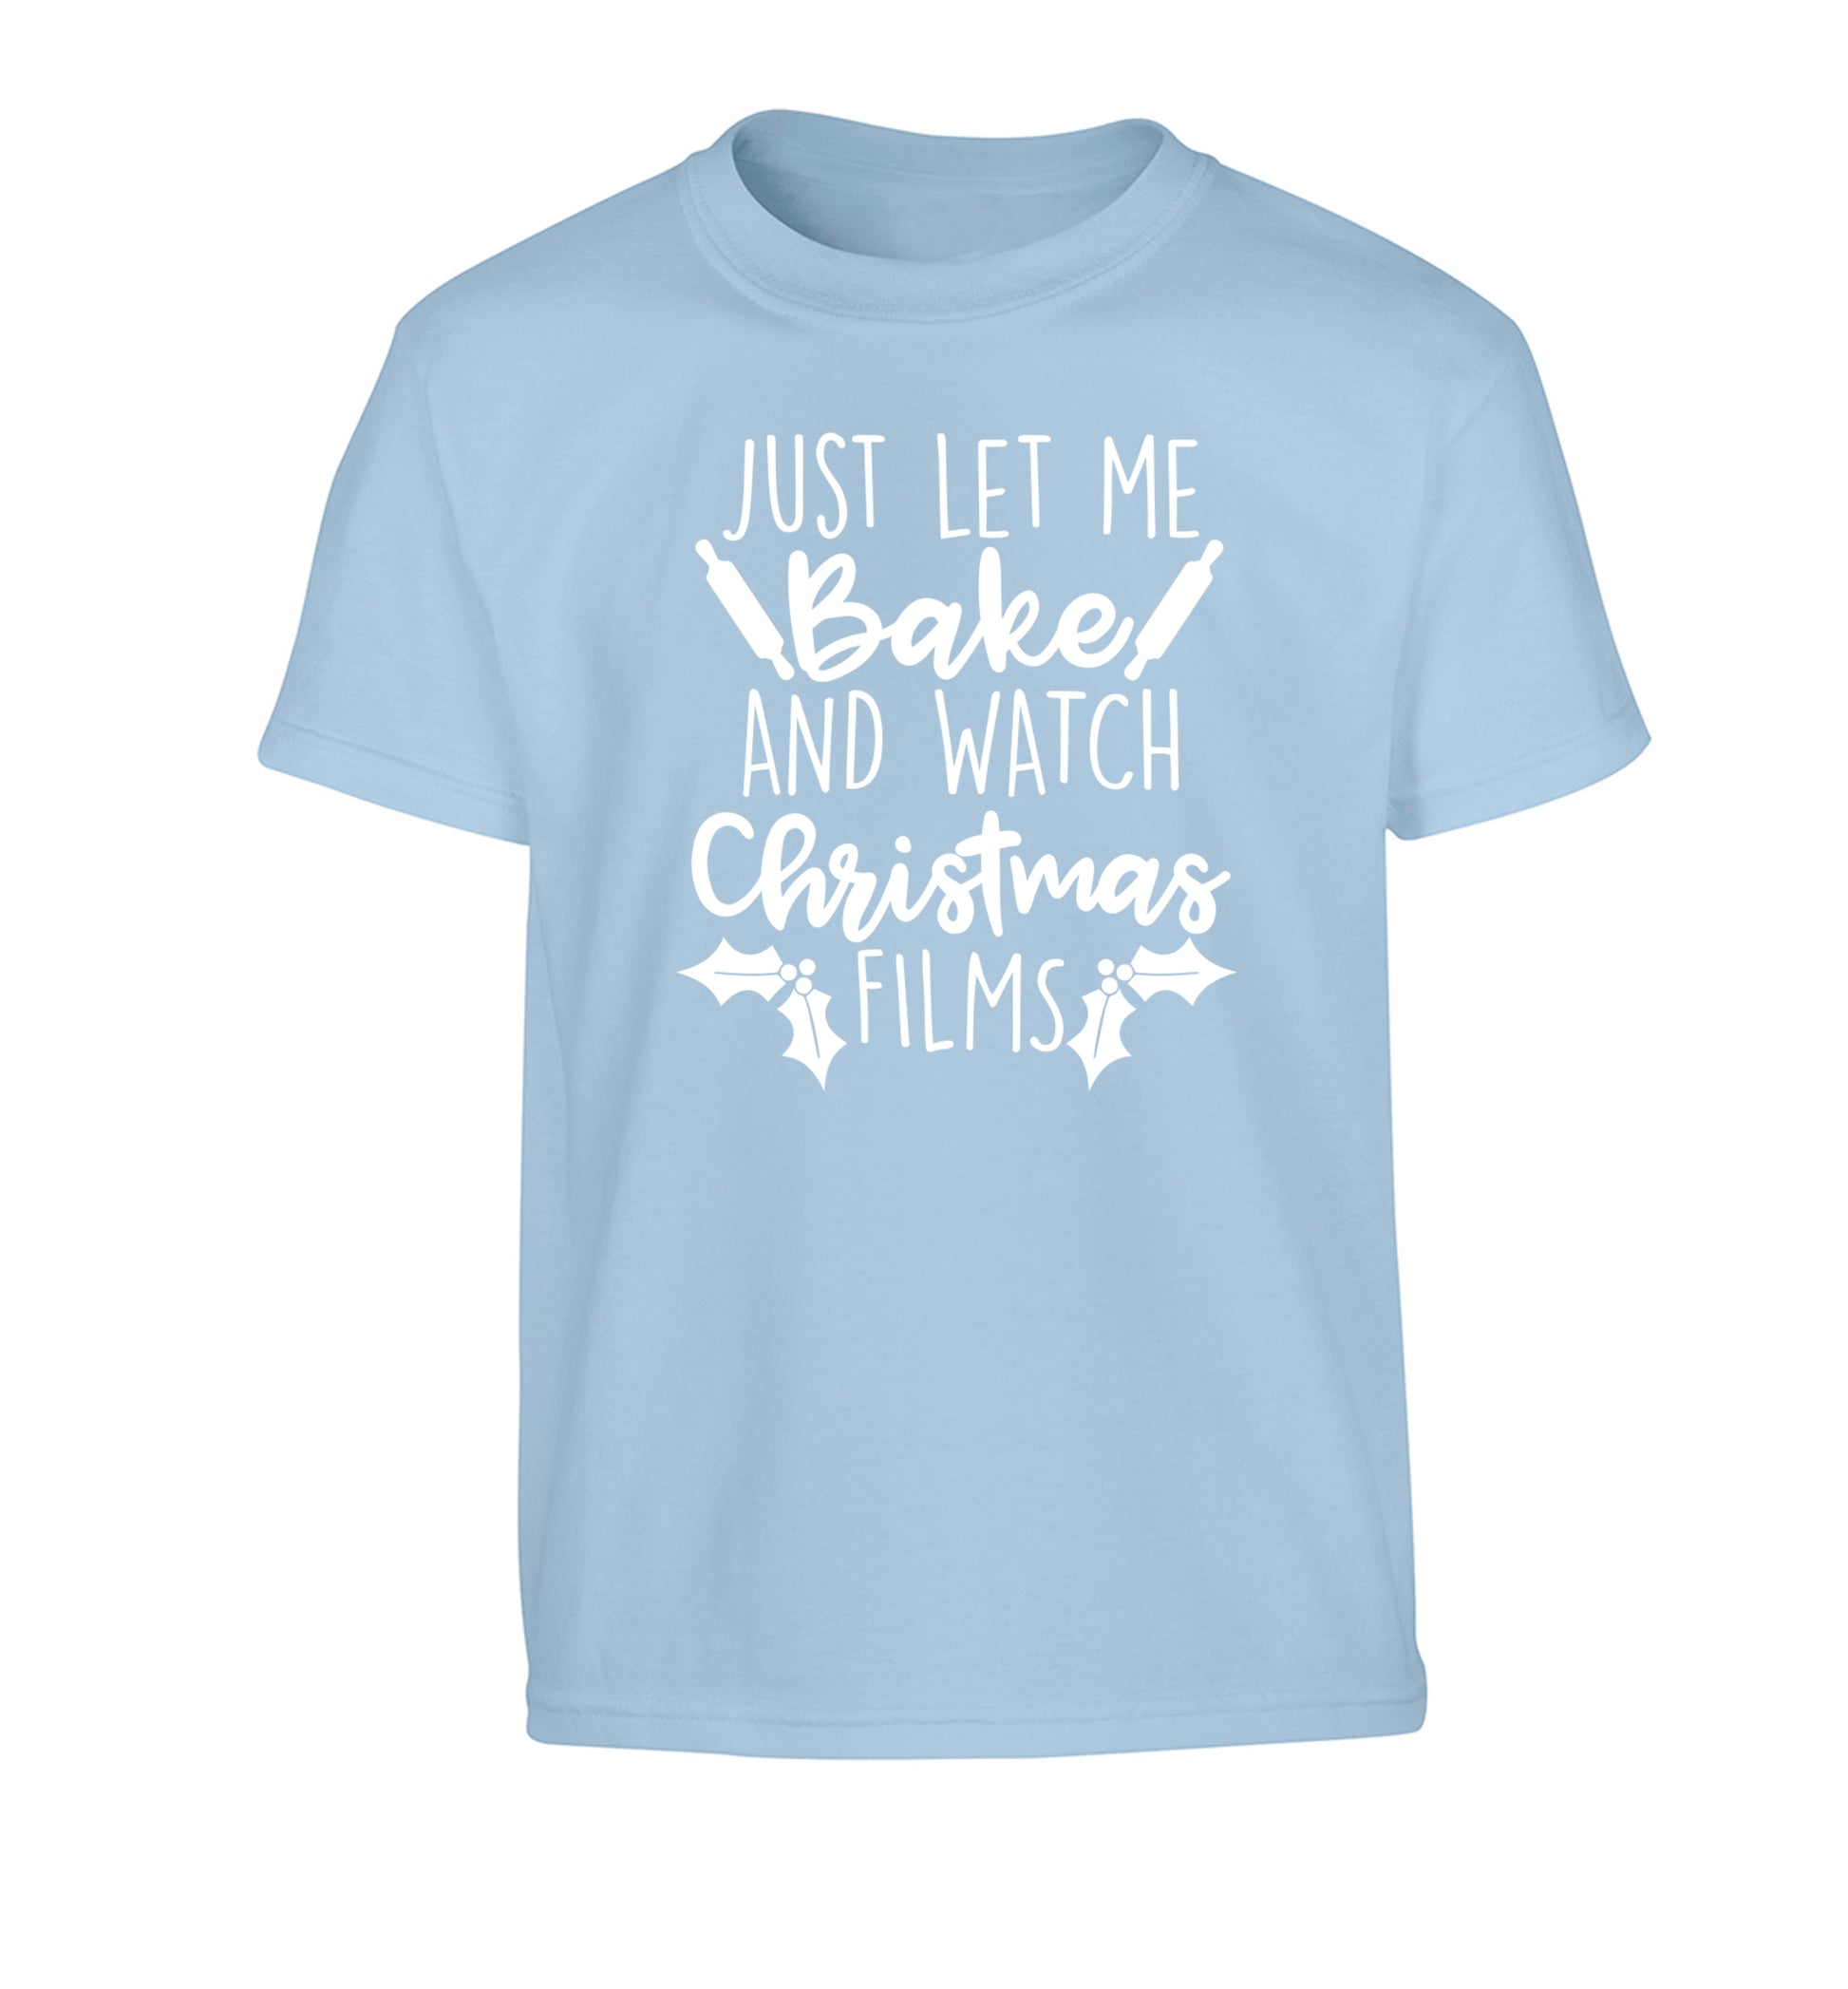 Just let me bake and watch Christmas films Children's light blue Tshirt 12-14 Years